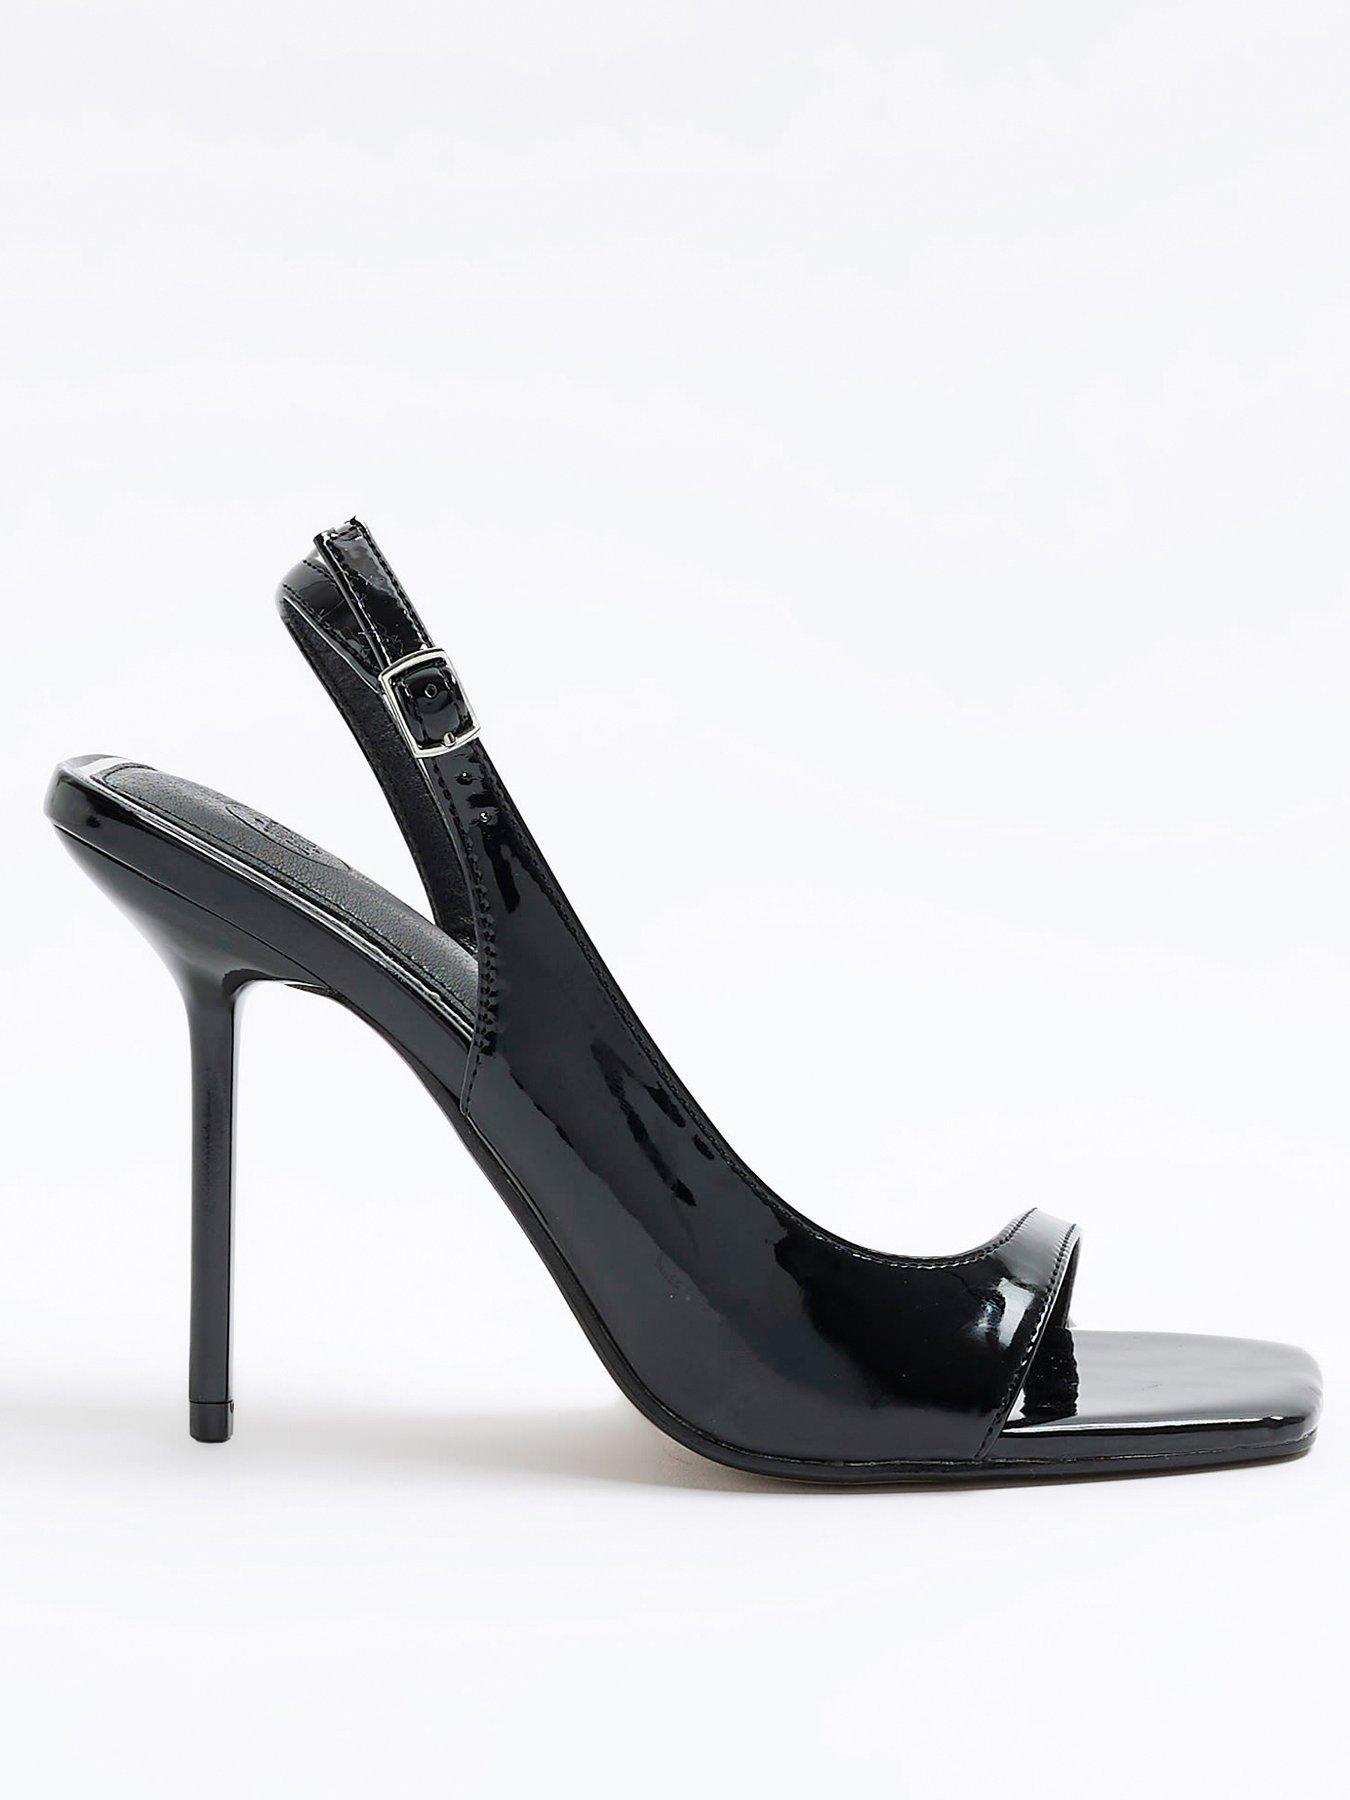 How Do Stars Wear Brutal 5-Inch Heels? One Solution Is Only $7.95